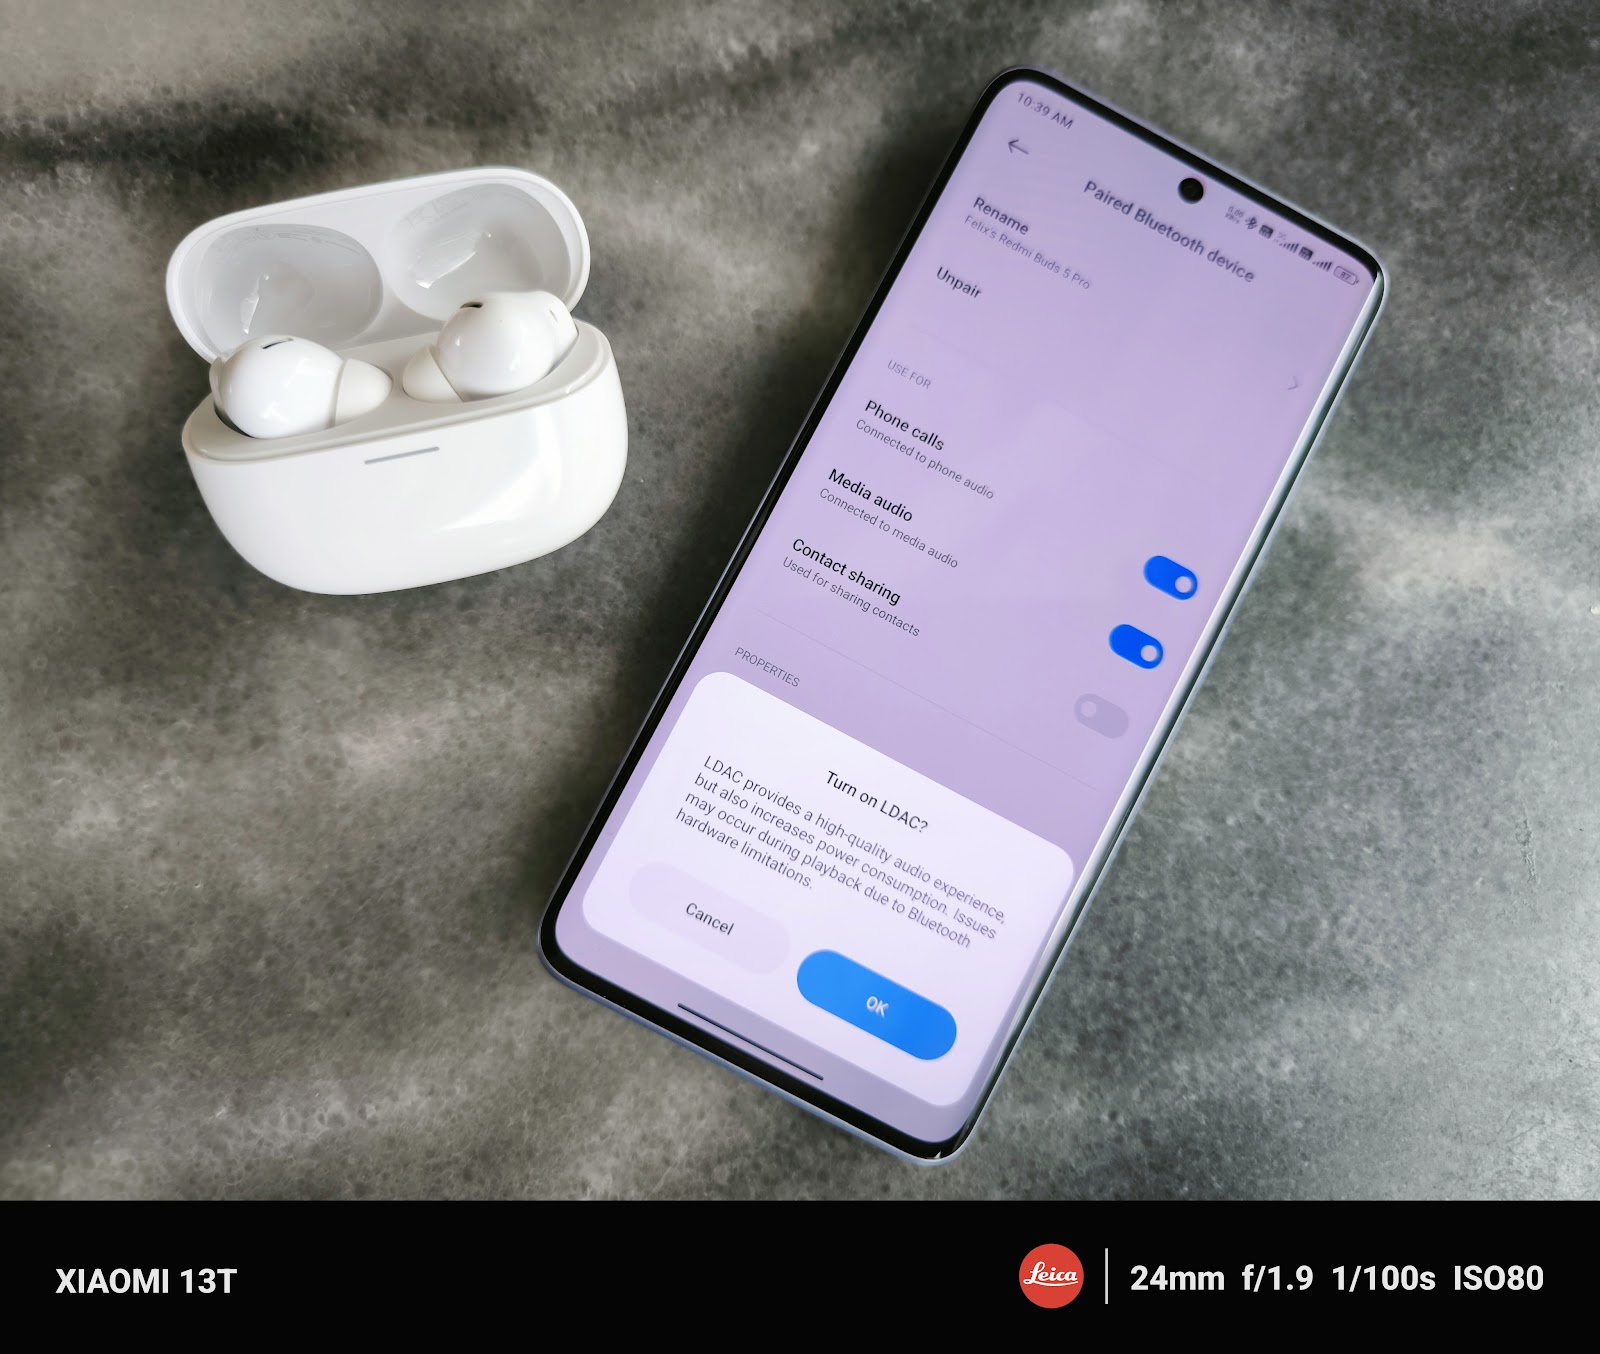 Redmi Buds 5 Pro: Taking Sound to the Best Level